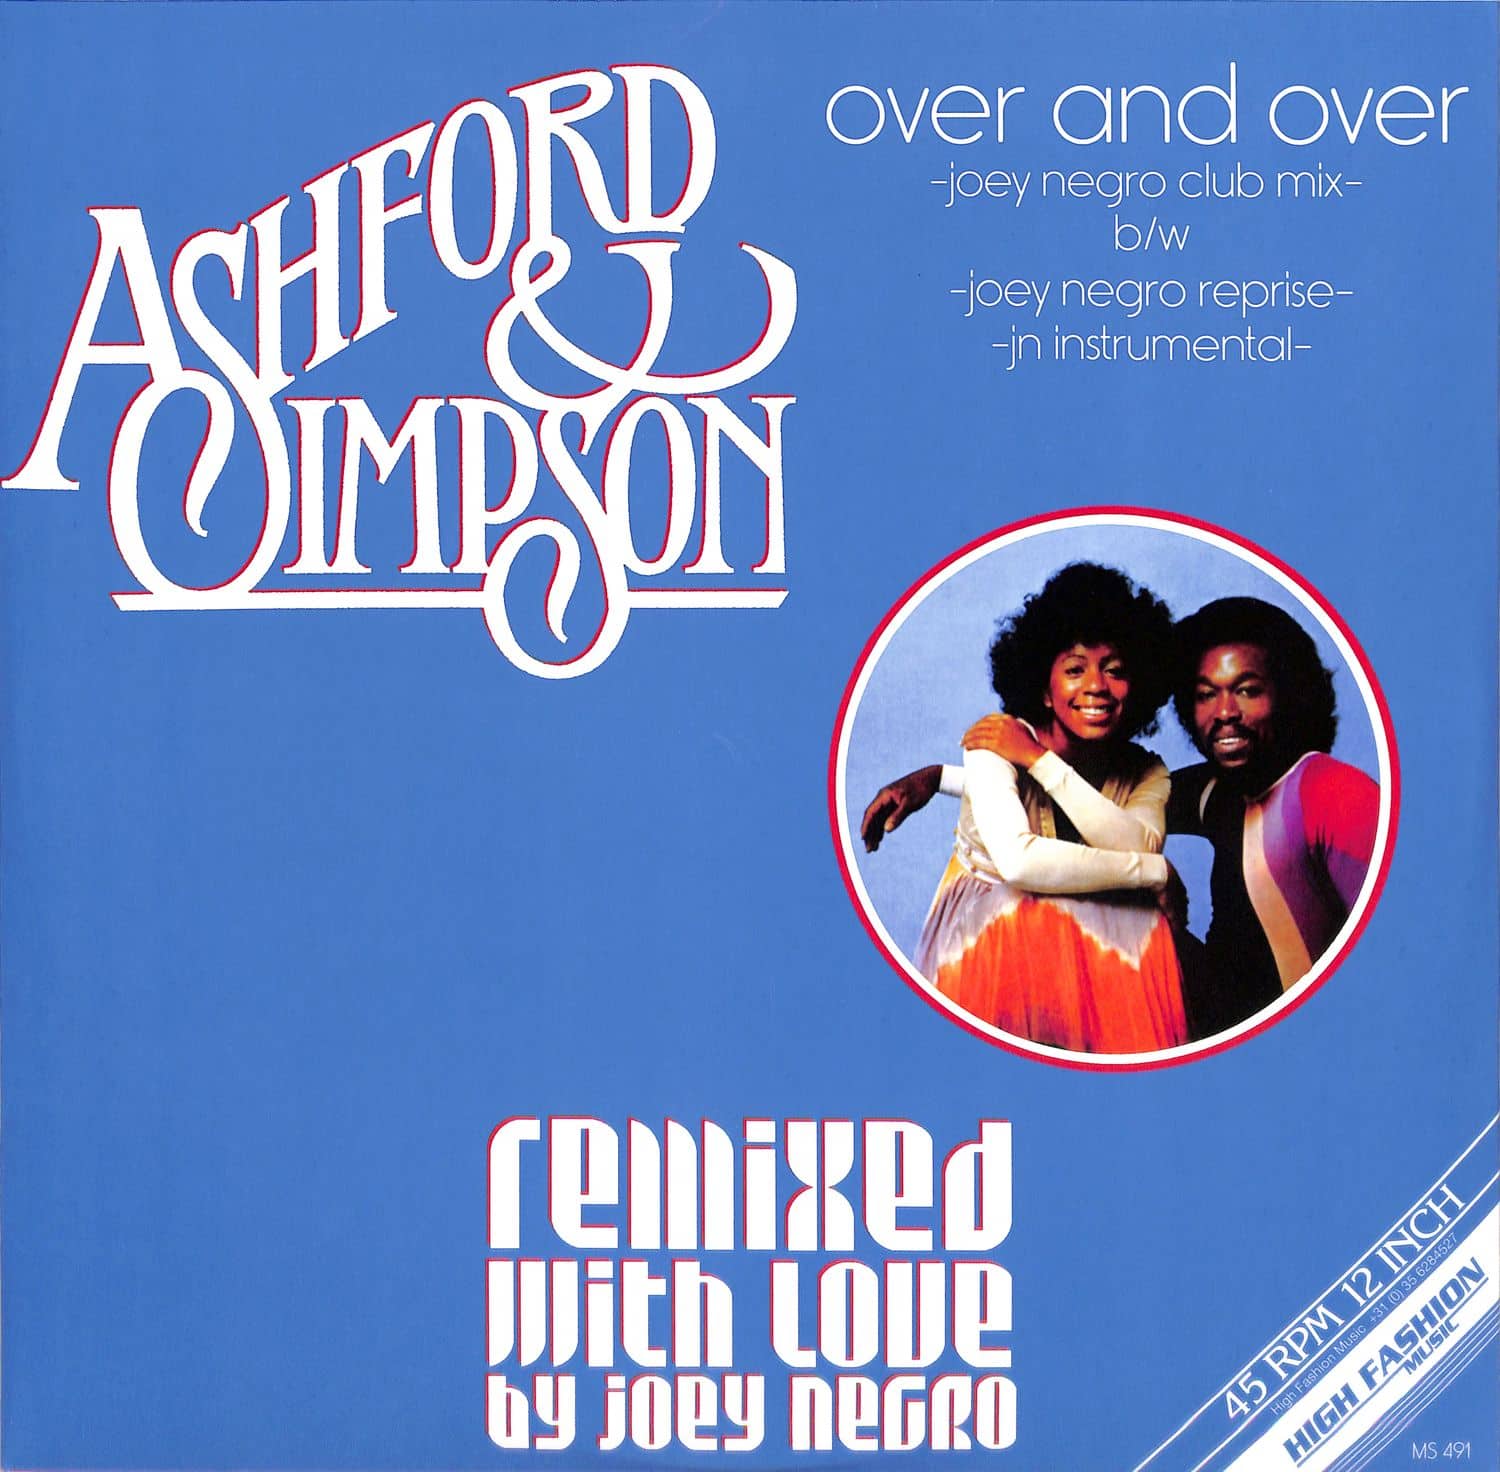 Ashford & Simpson - OVER AND OVER 